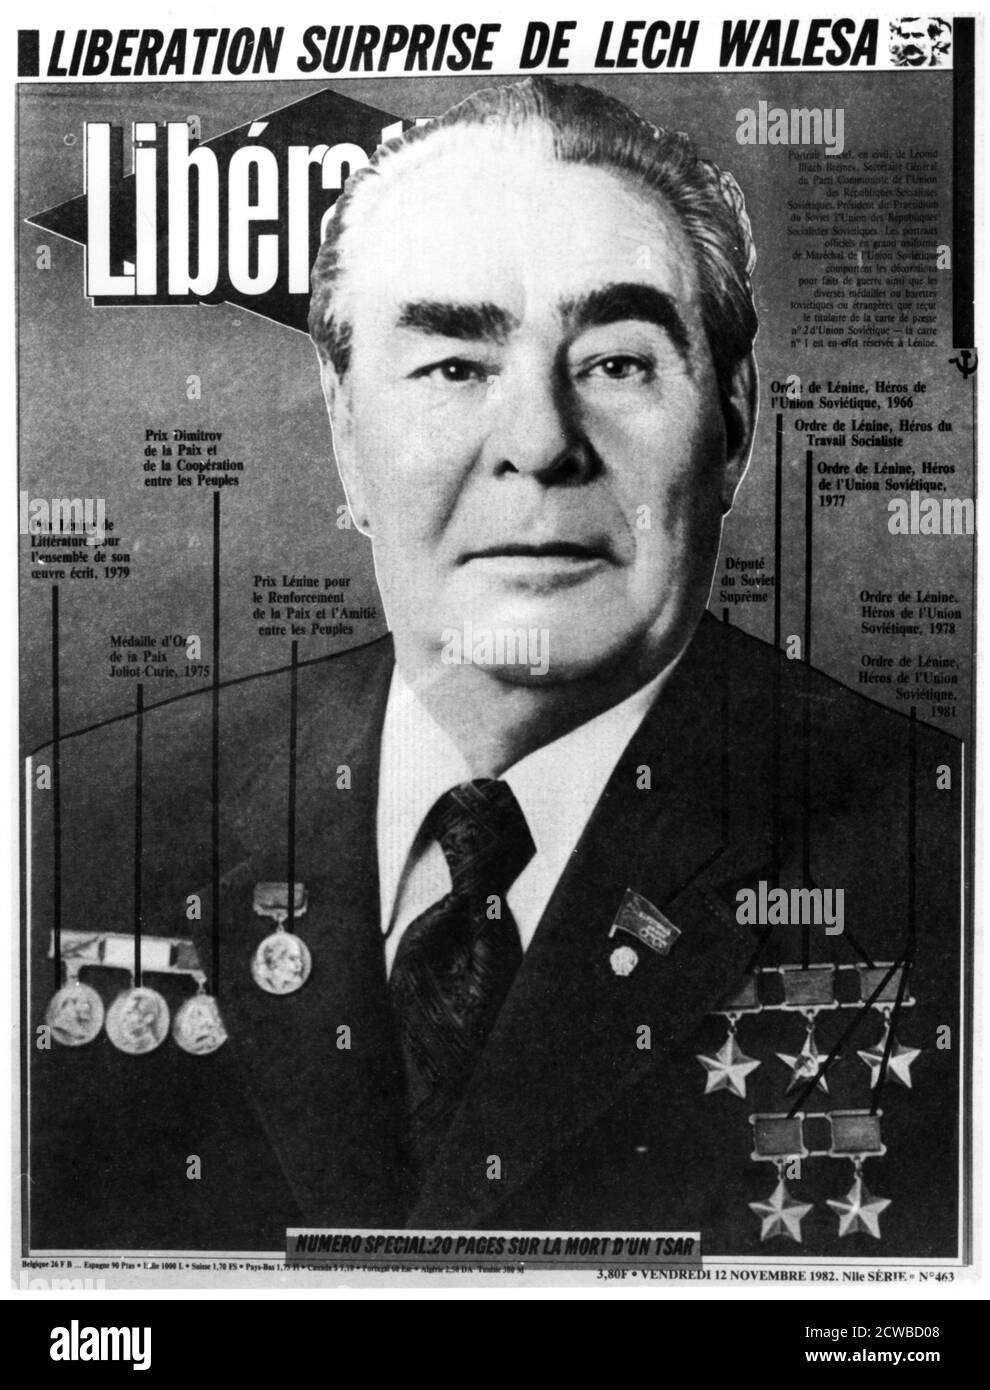 Leonid Brezhnev, Soviet leader, pictured on the cover of Liberation, 1982, the day after his death. Brezhnev (1907-1982) was General Secretary of the Communist Party of the Soviet Union and effective ruler of the USSR from 1964 until his death in 1982. The photographer is unknown. Stock Photo